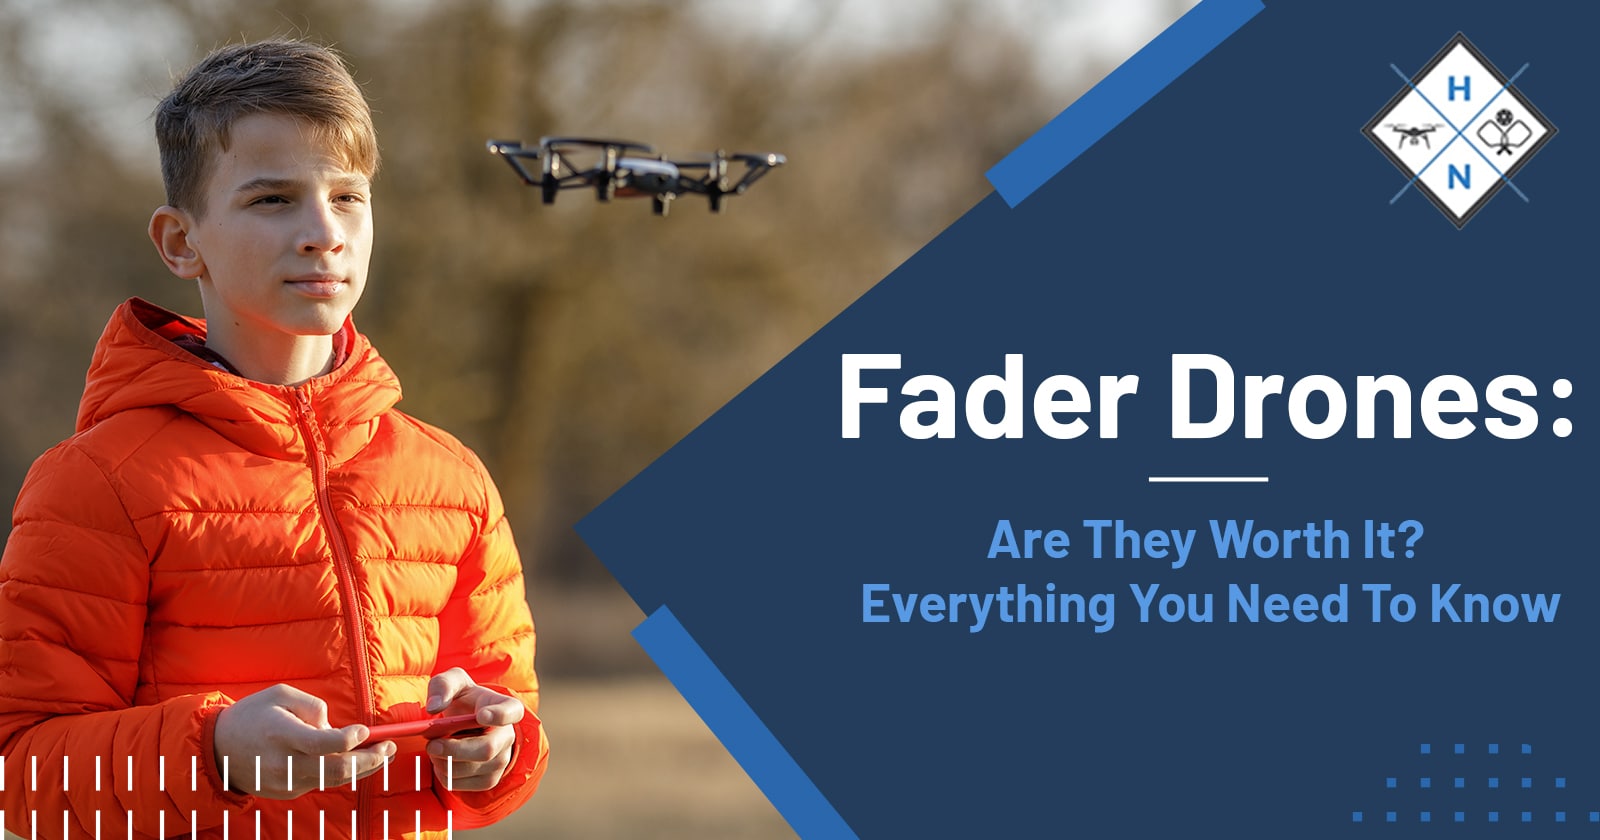 Fader Drones: Are They Worth It? Everything You Need To Know